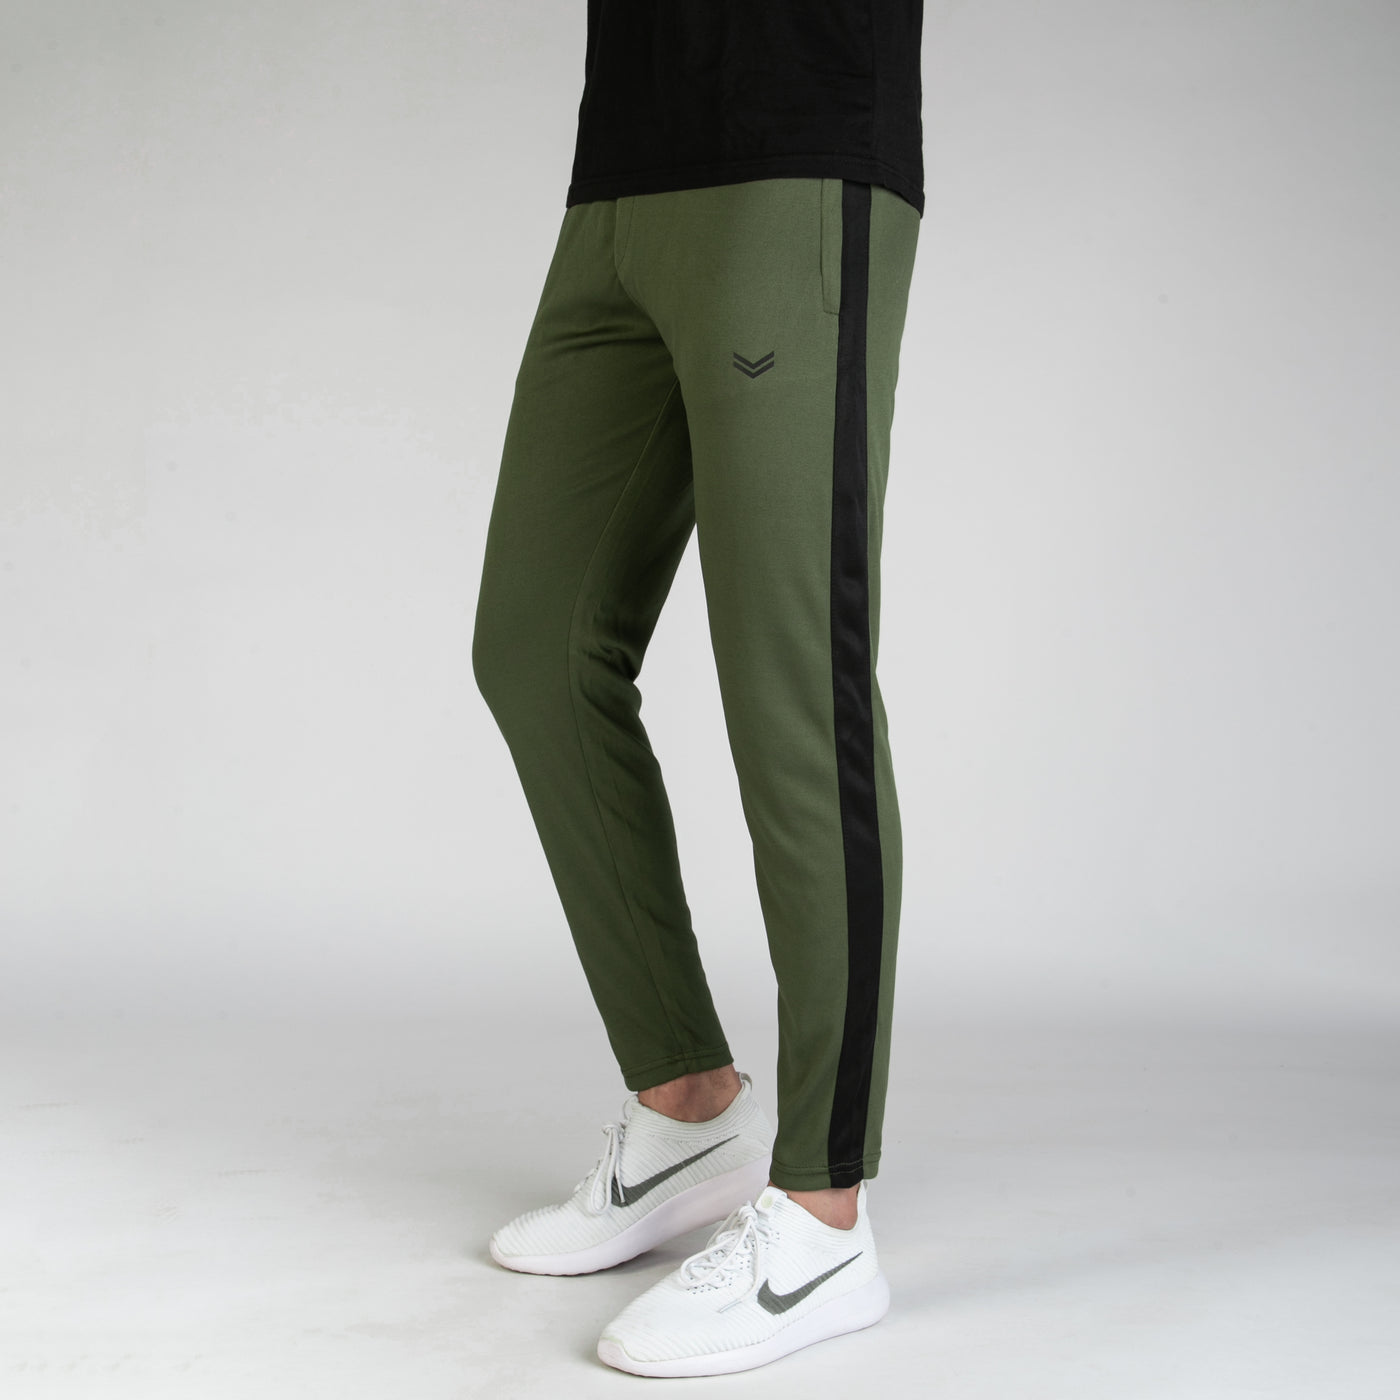 Olive Quick Dry Bottoms with Black Panel